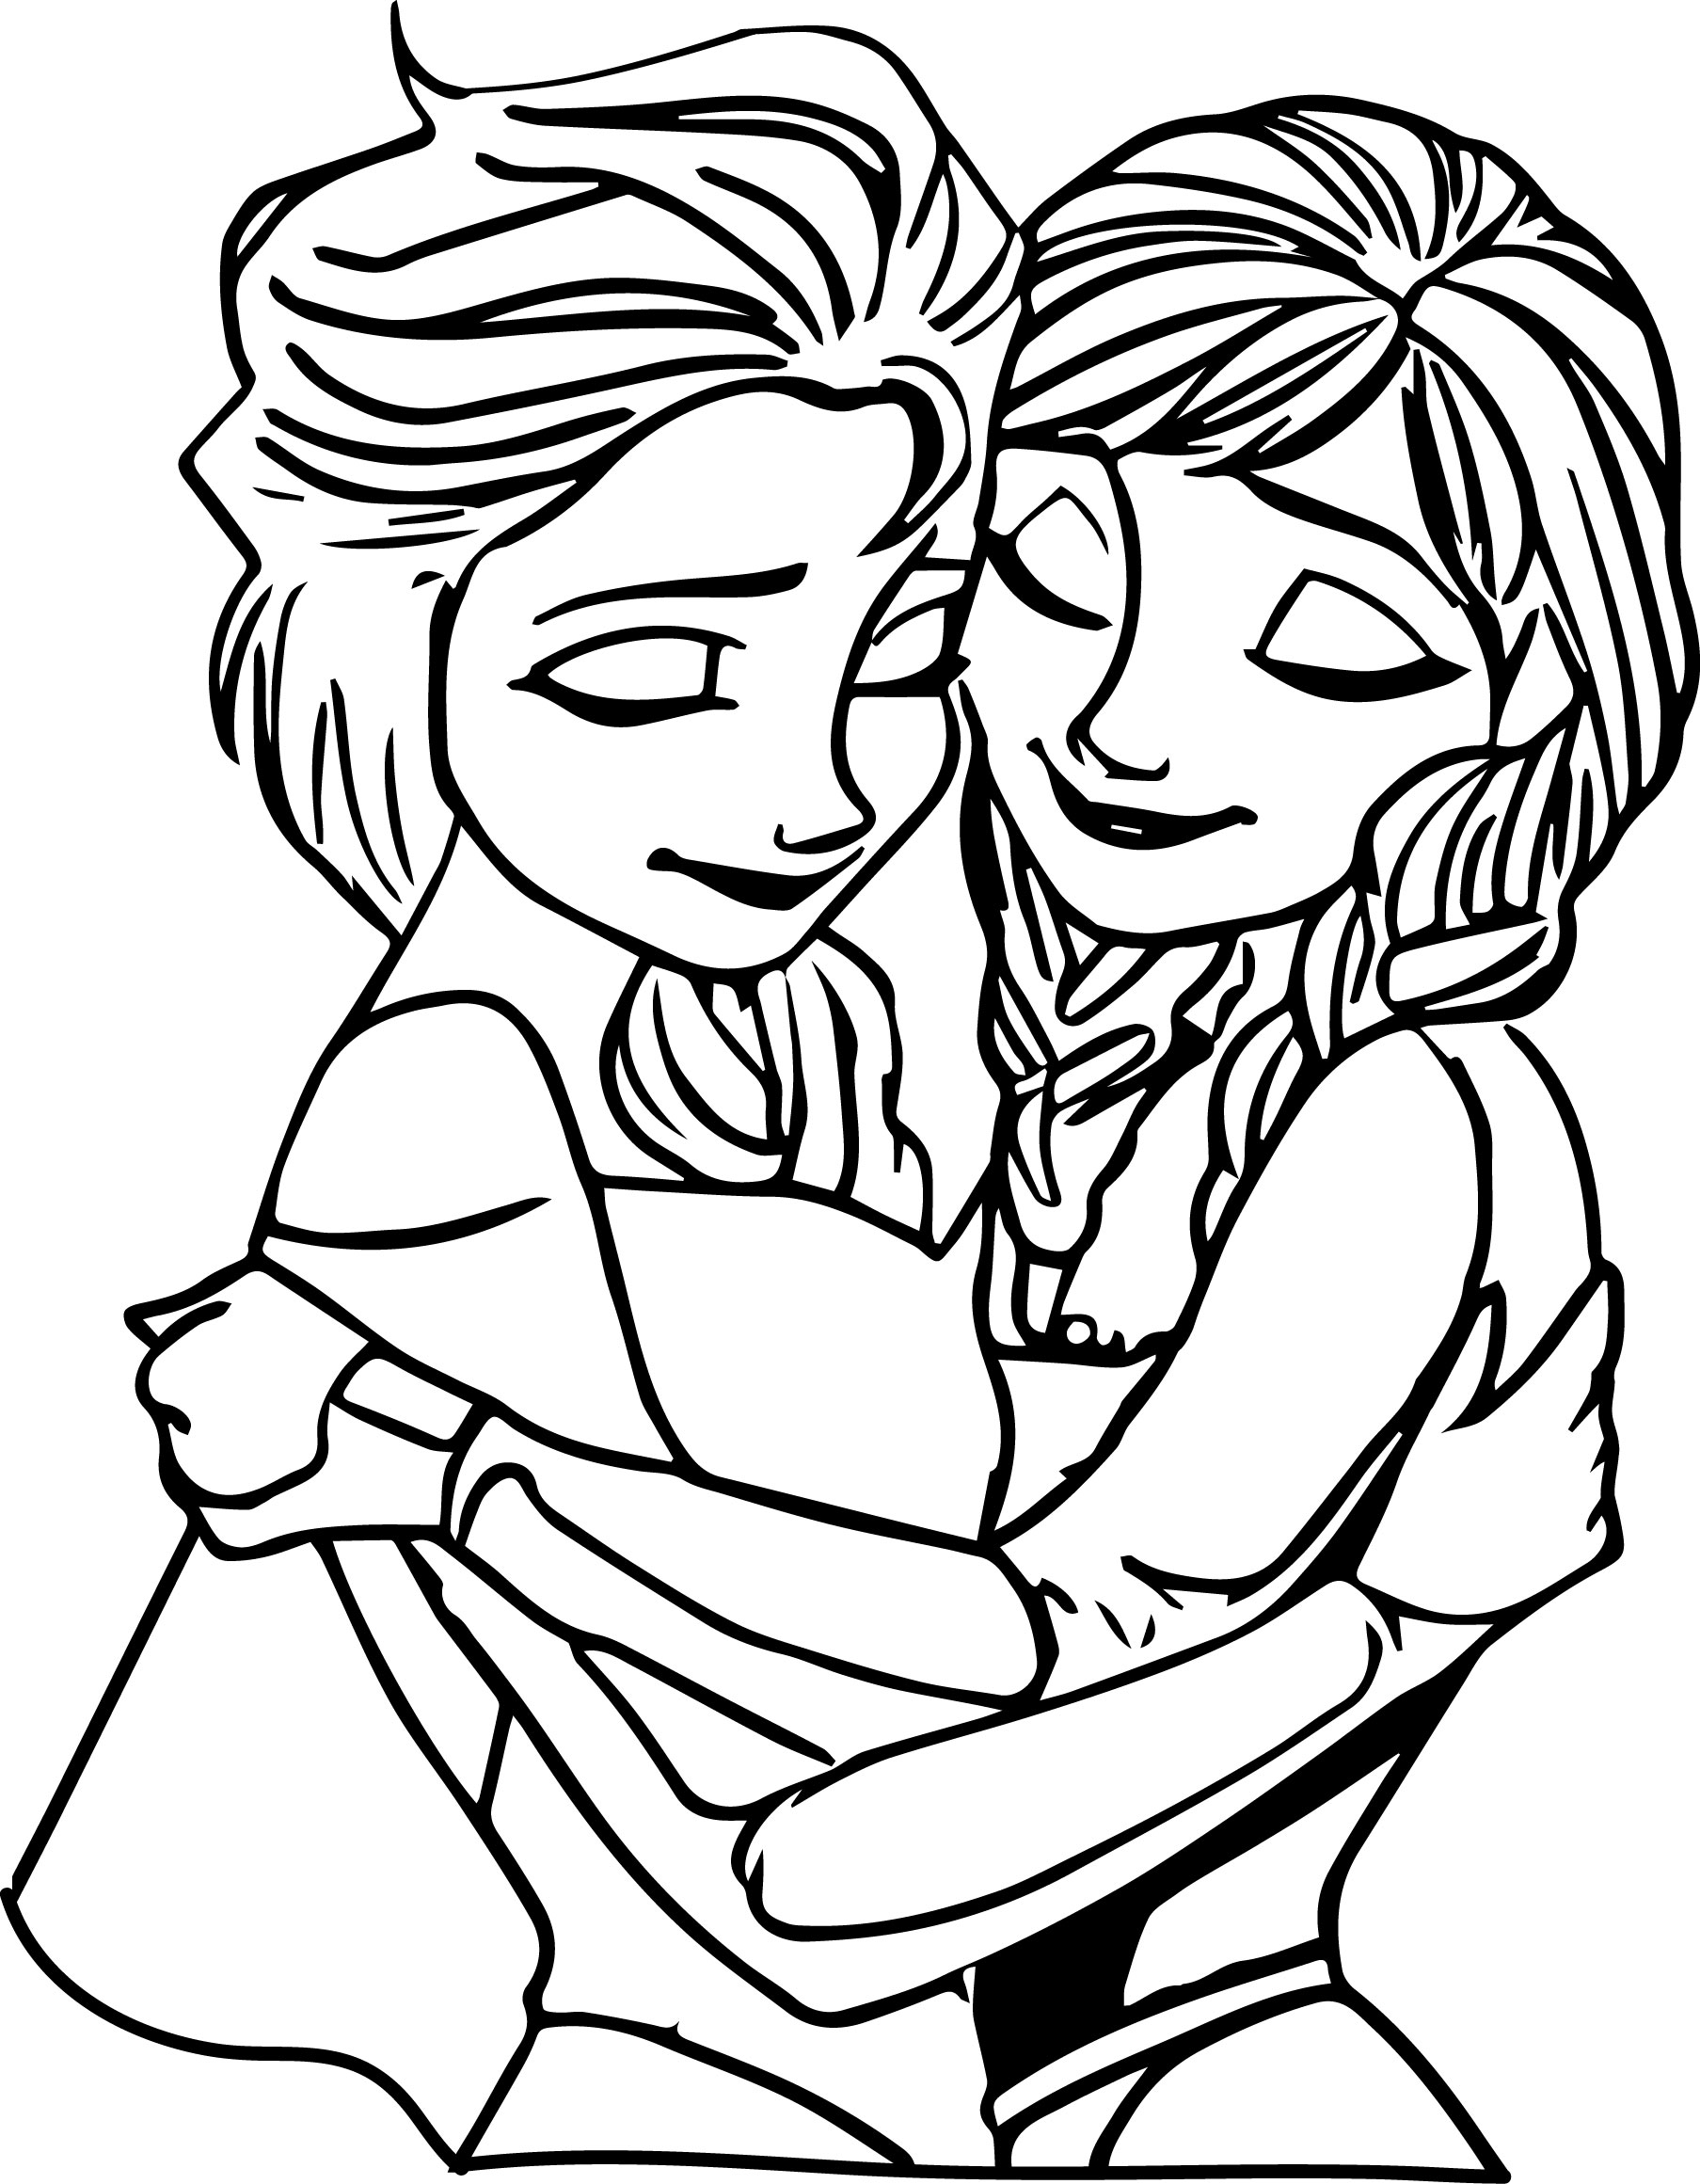 anna and elsa frozen coloring pages 15 beautiful disney frozen coloring pages free instant anna frozen coloring pages elsa and 